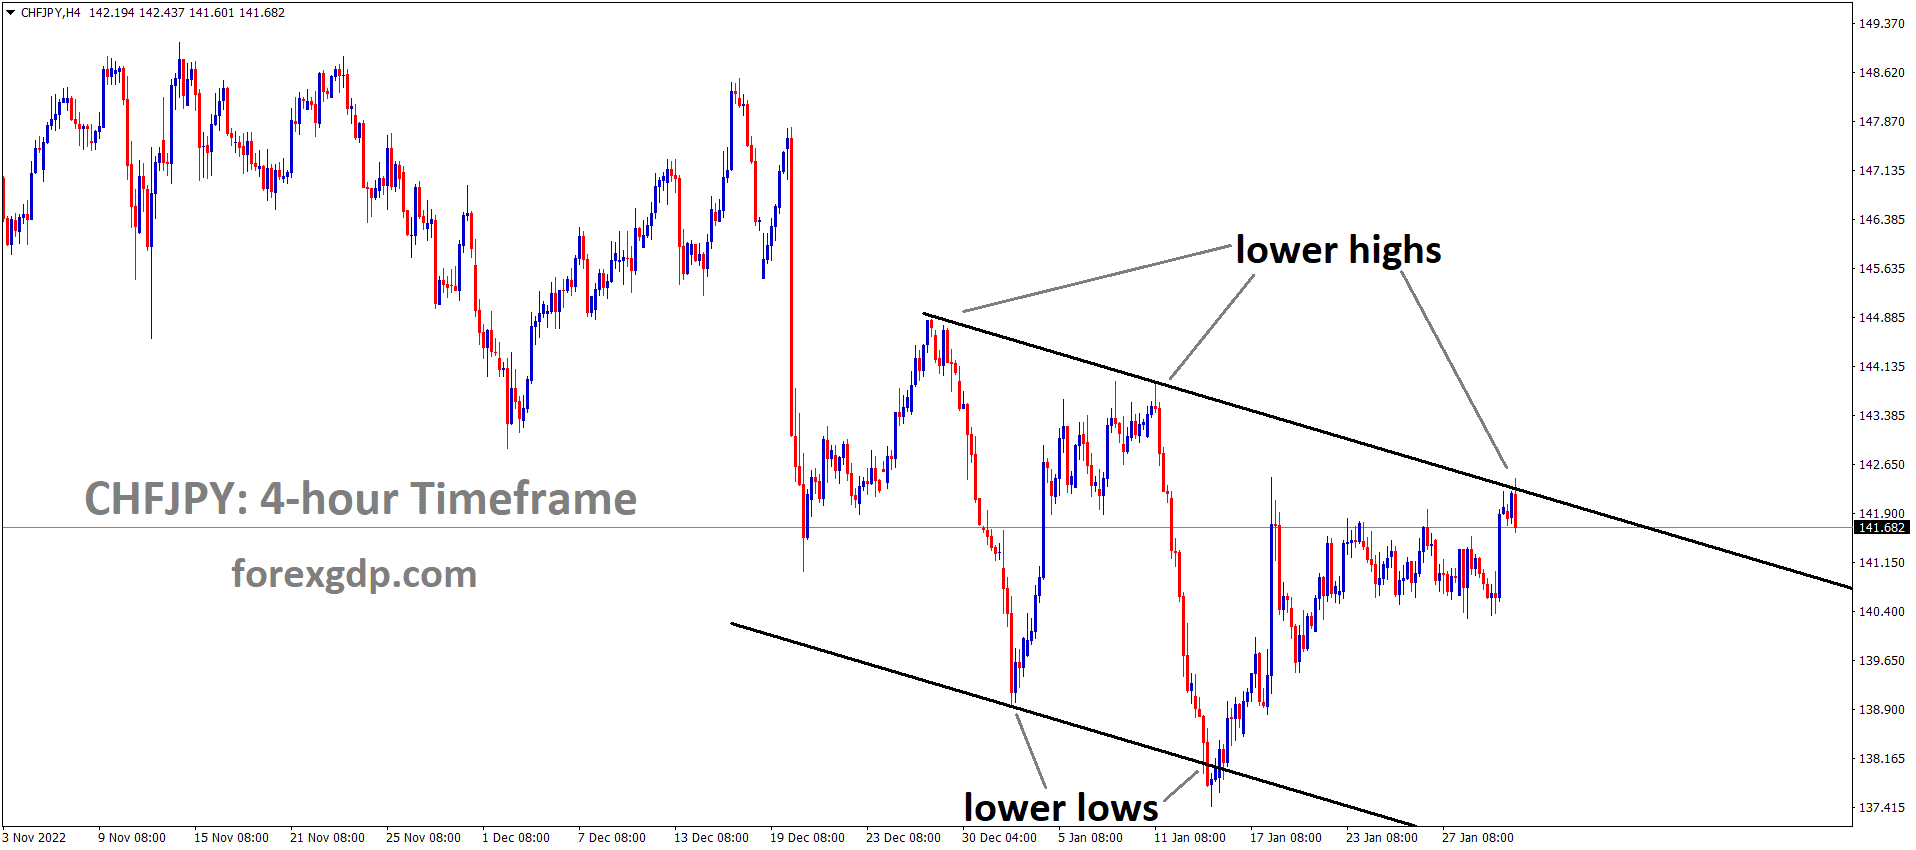 CHFJPY is moving in the Descending channel and the market has reached the lower high area of the channel